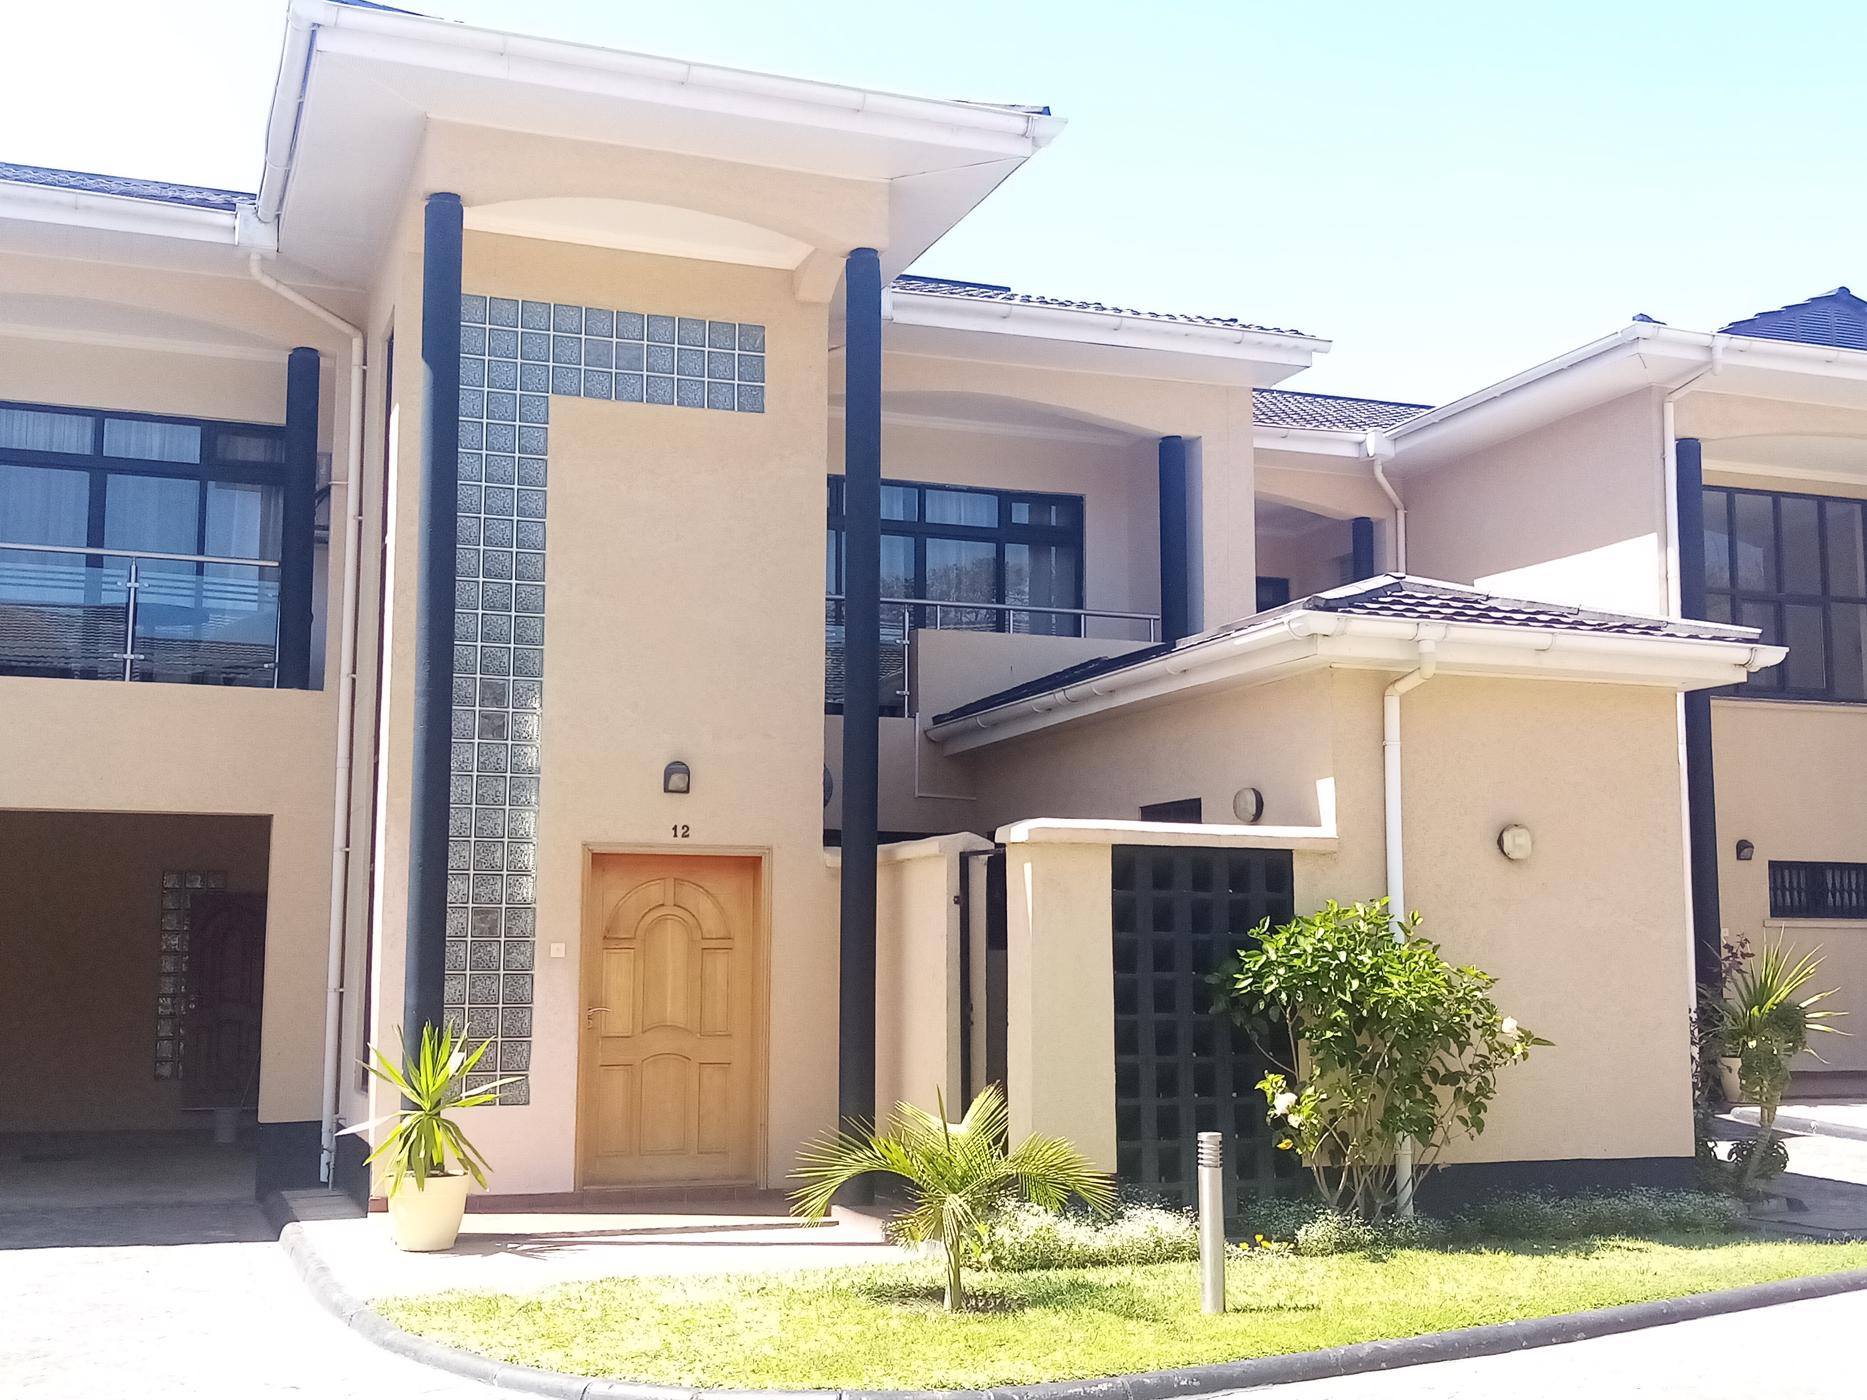 3 bedroom double-storey apartment to rent in Prospect Hill (Zambia)